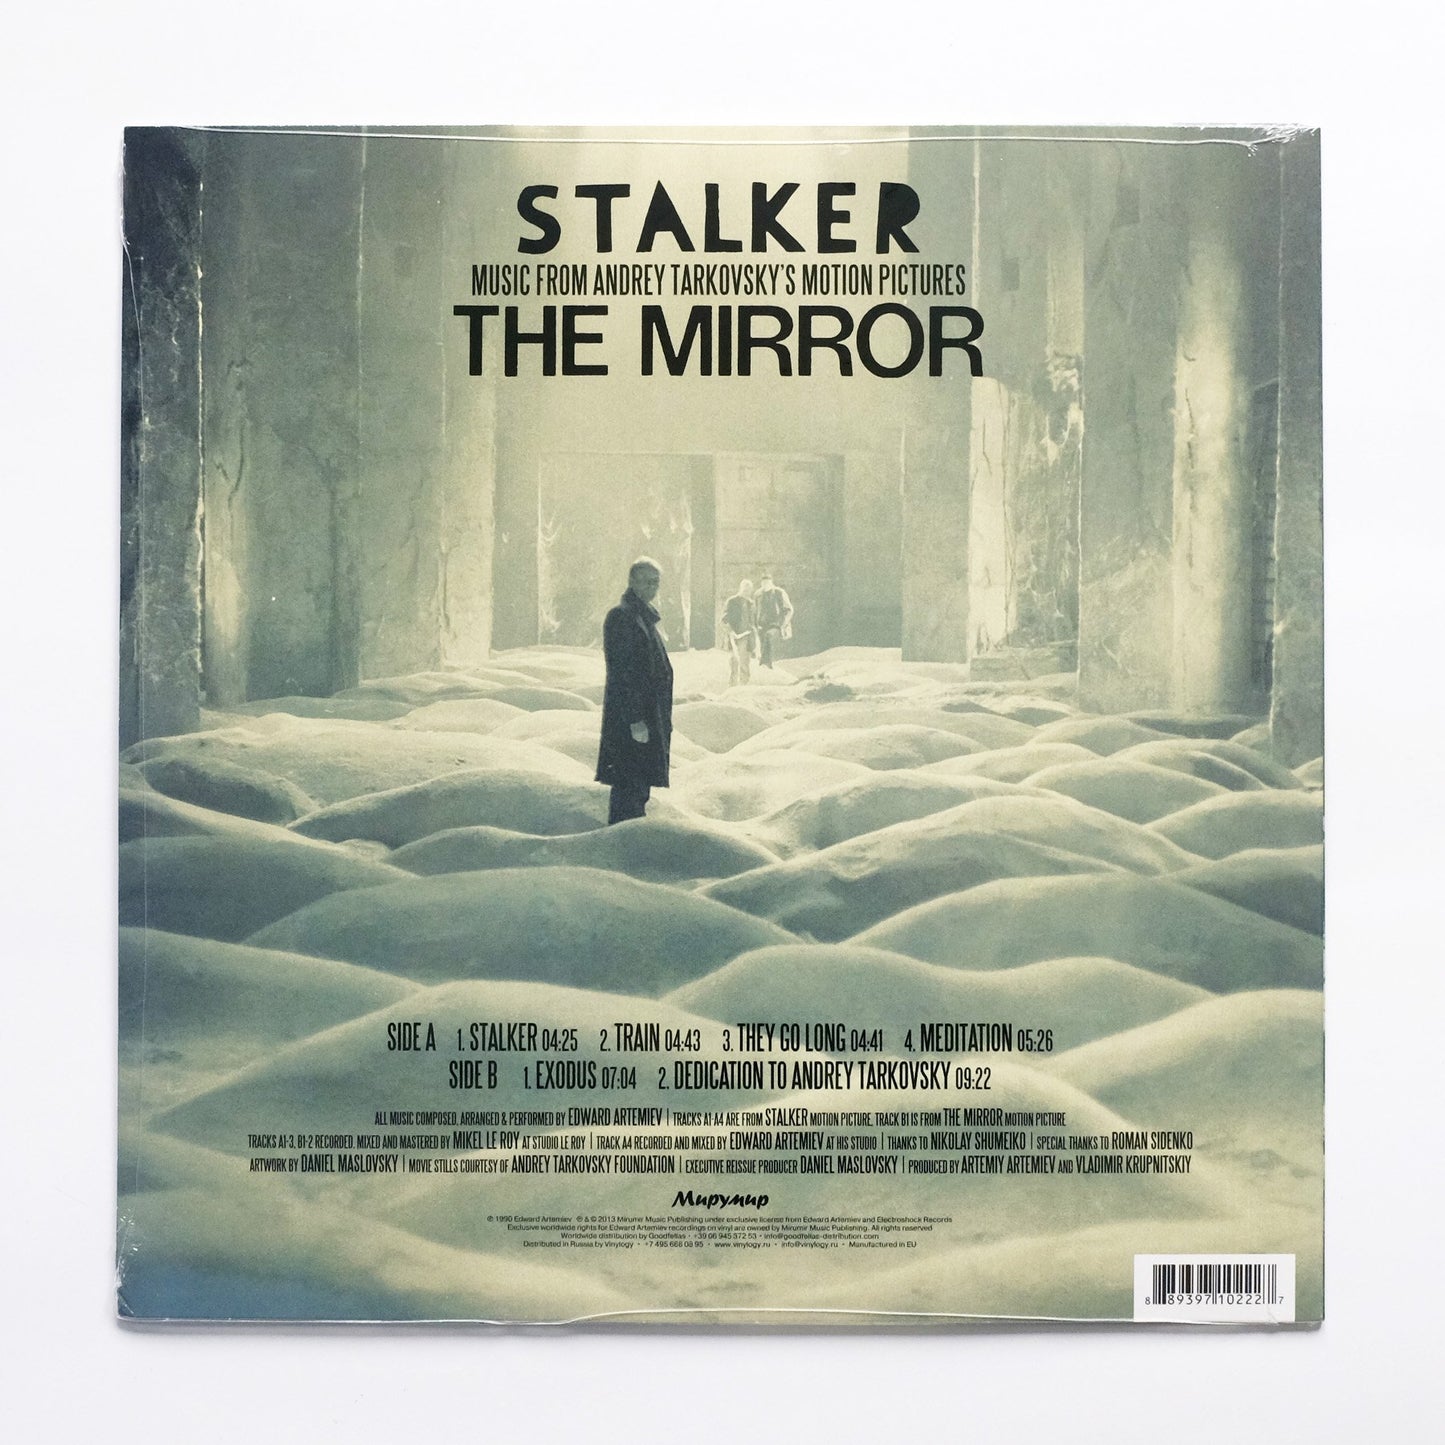 Edward Artemiev - Stalker / The Mirror: Music From Andrey Tarkovsky’s Motion Pictures